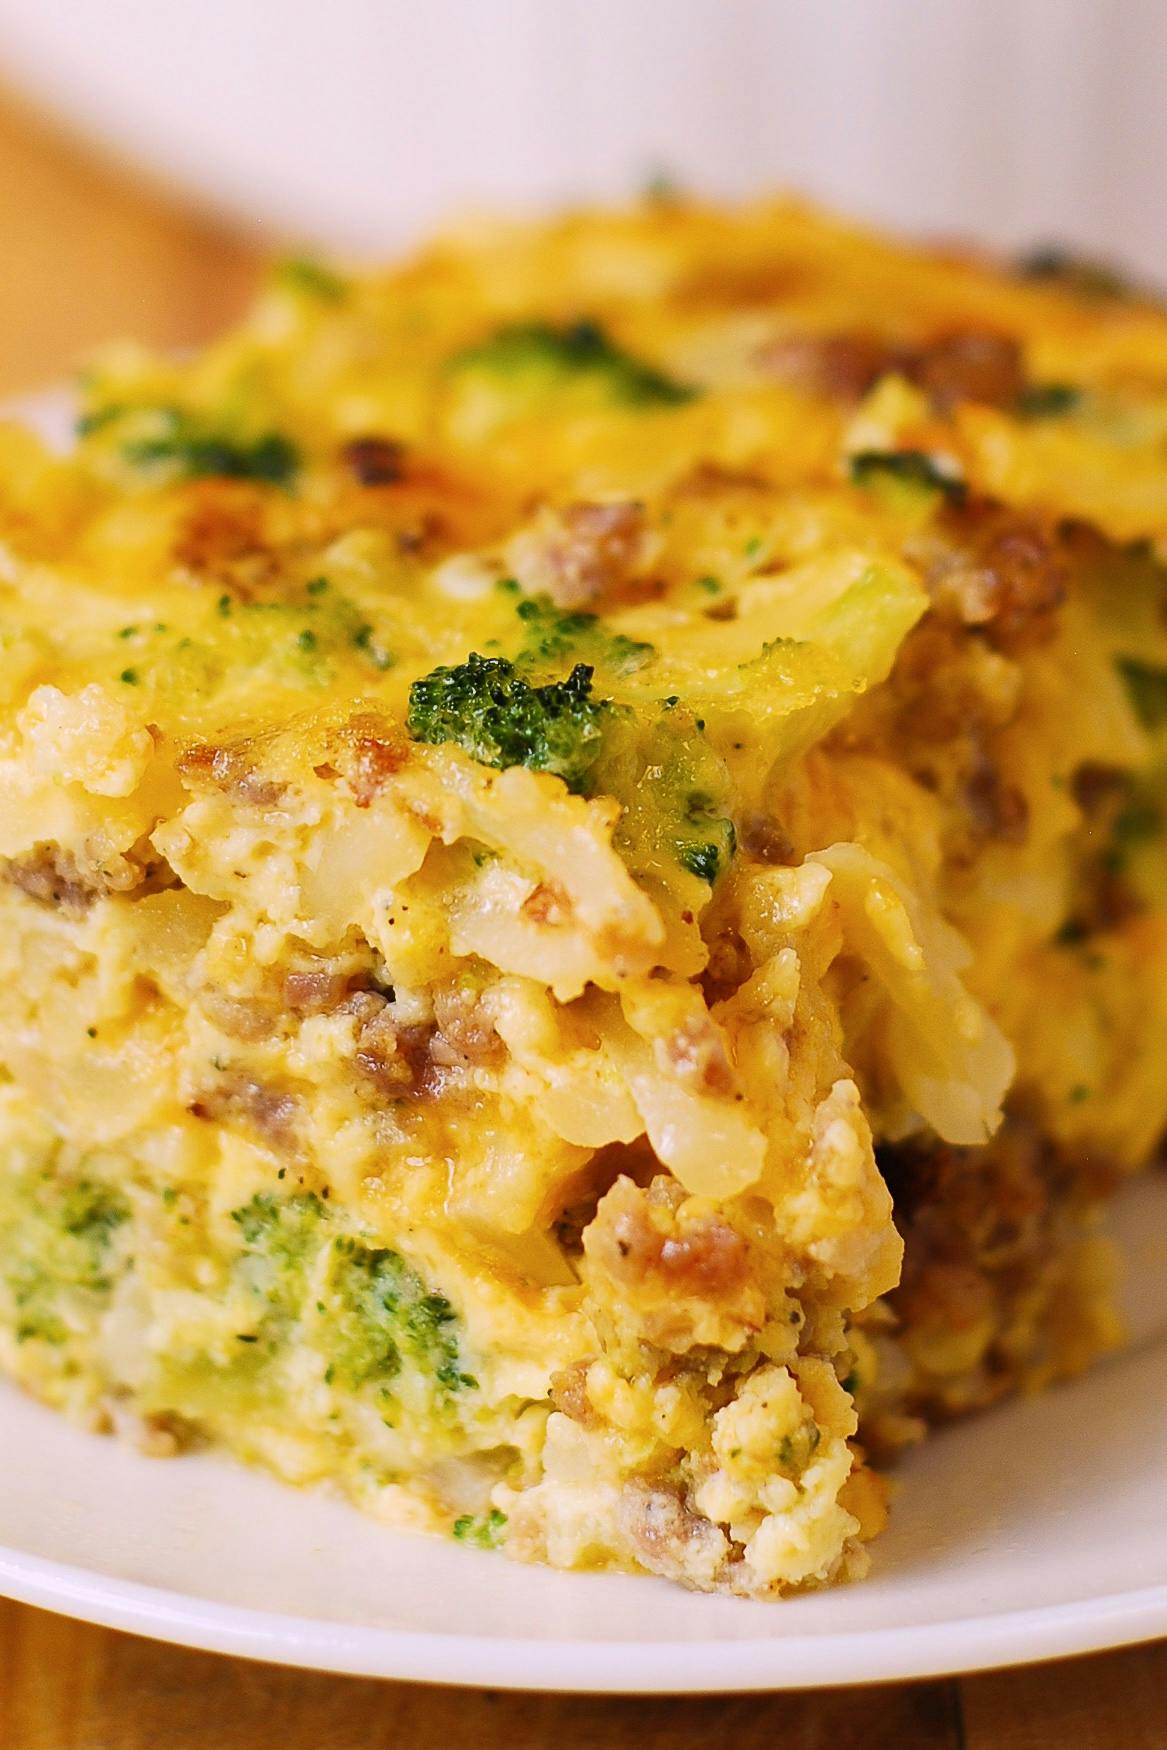 Sausage and Egg Breakfast Casserole with Hash Browns and Broccoli